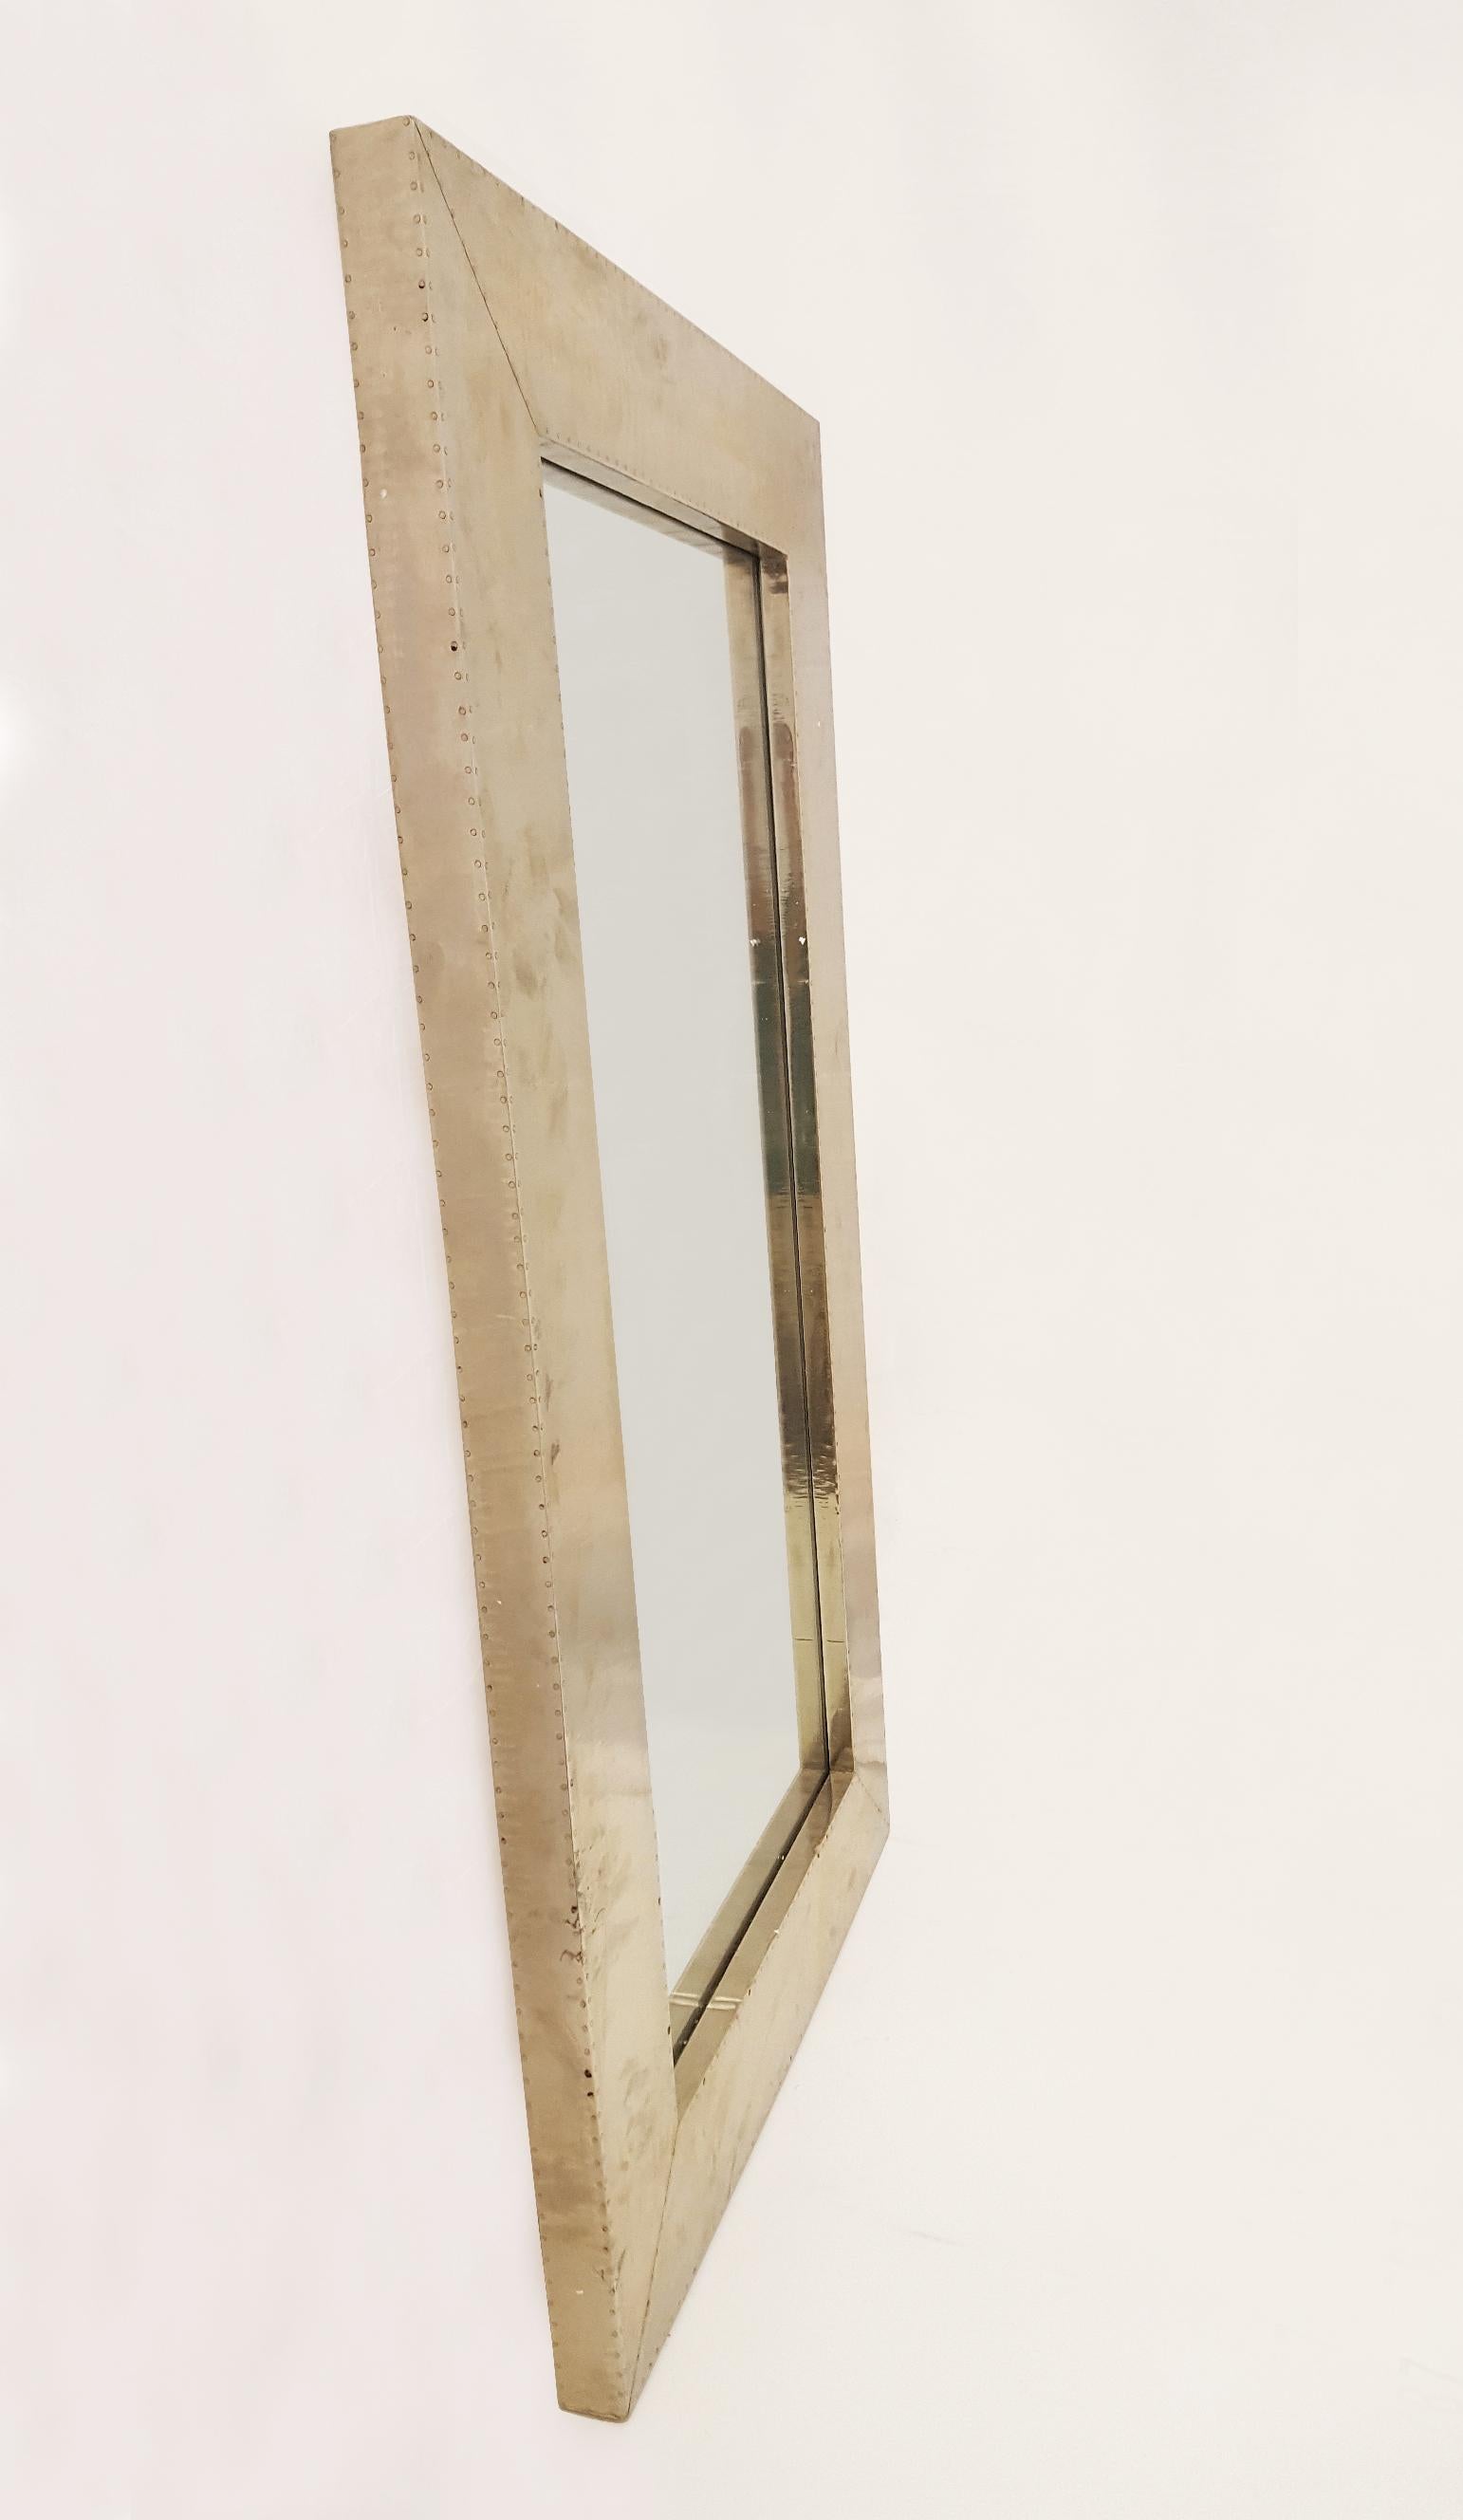 A simple rectangular mirror frame. The metal sheets are attached and covering the entire outside surface of the piece. The available options for metal cladding are brass, white bronze, antiqued bronze, silver and copper. Both silver and copper will